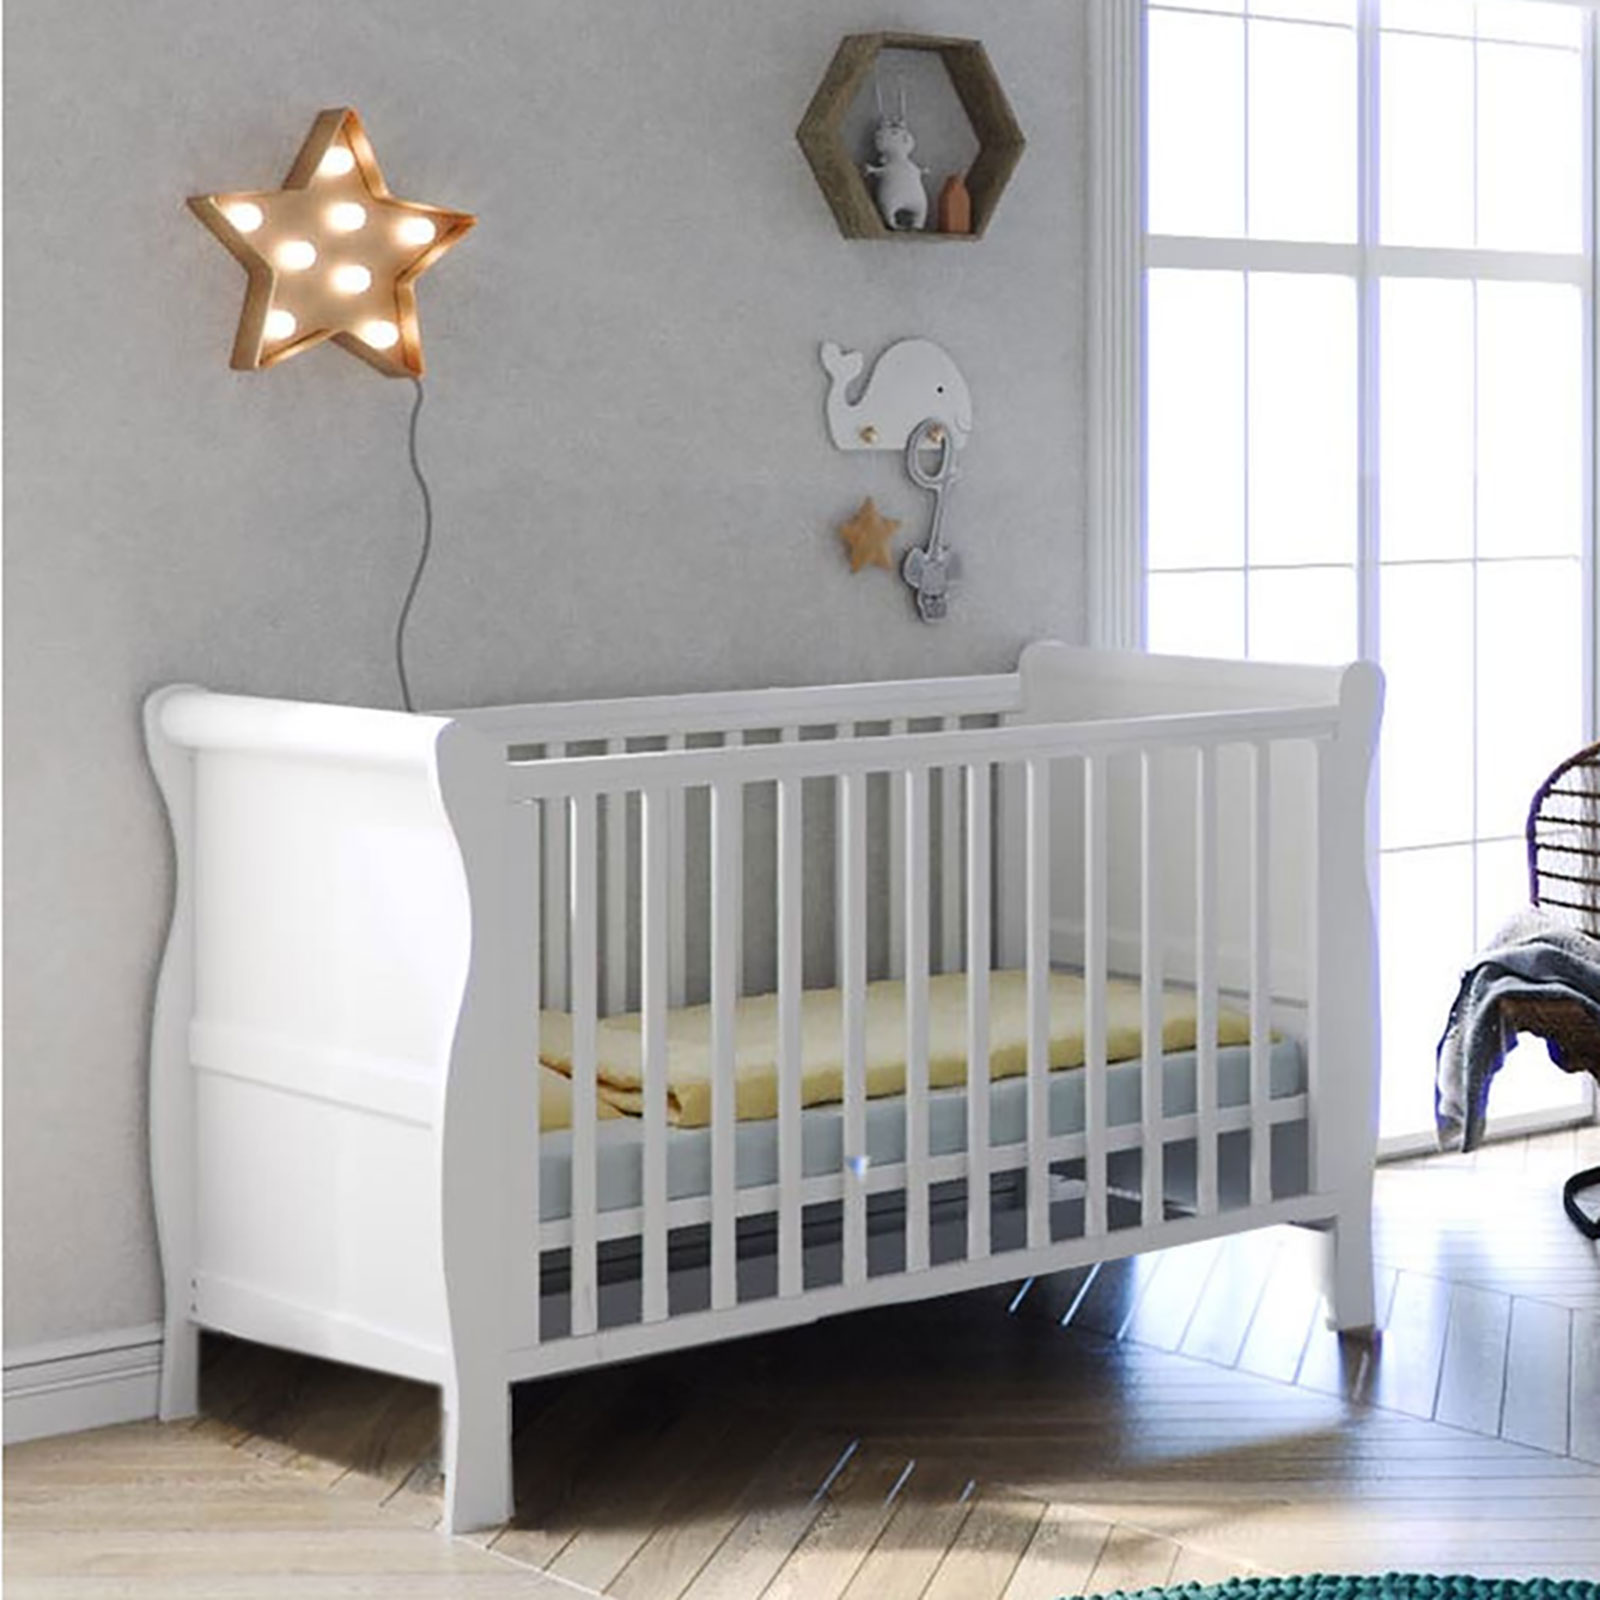 Puggle Alderley Sleigh Cot Bed With Maxi Air Cool Mattress - White